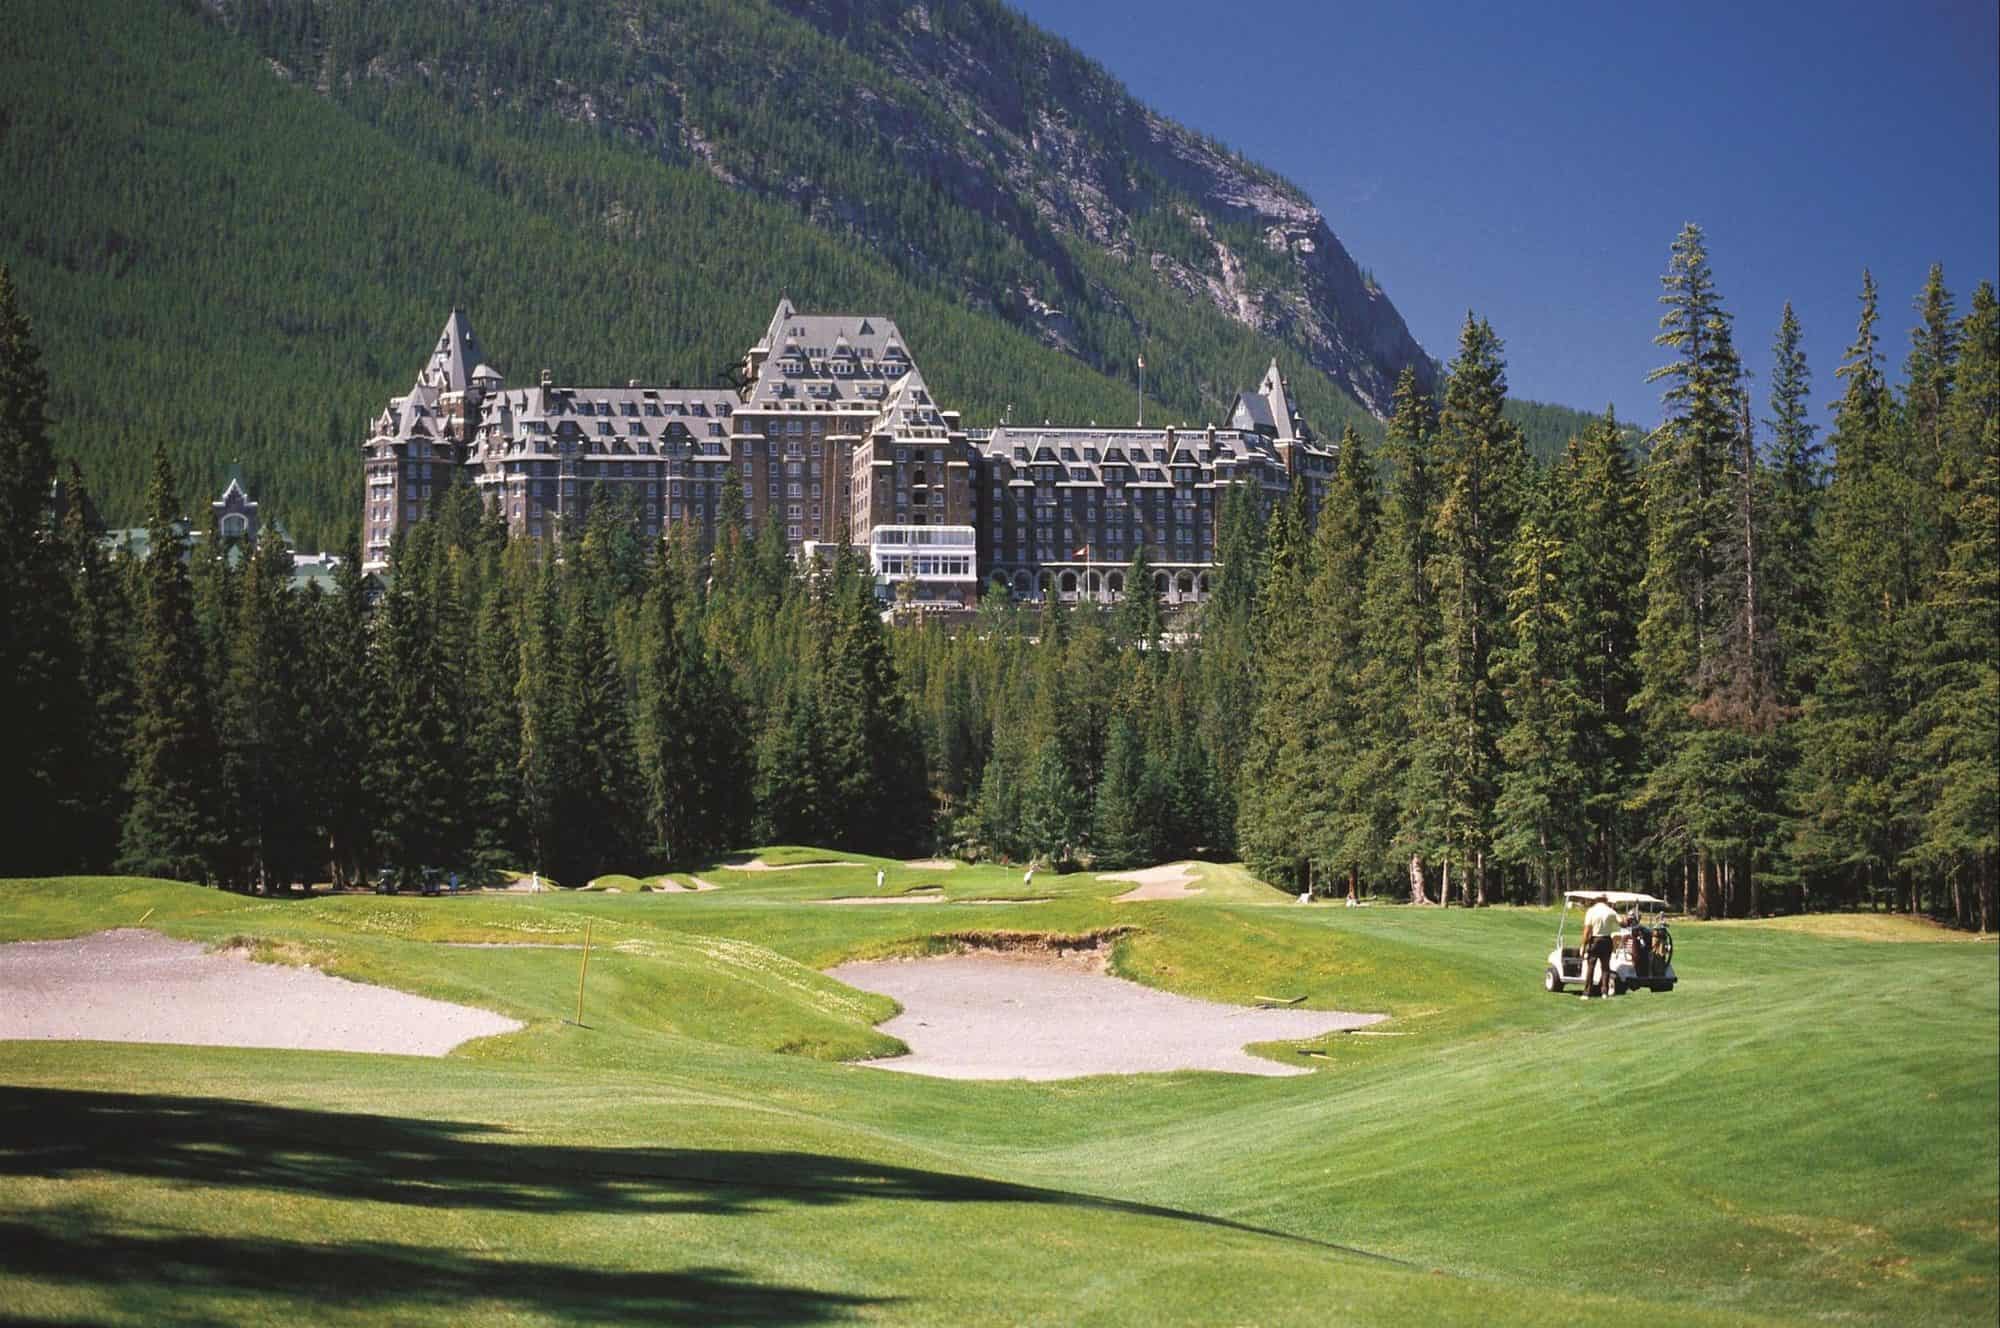 things to do in Banff with kids include golfing at the Fairmont